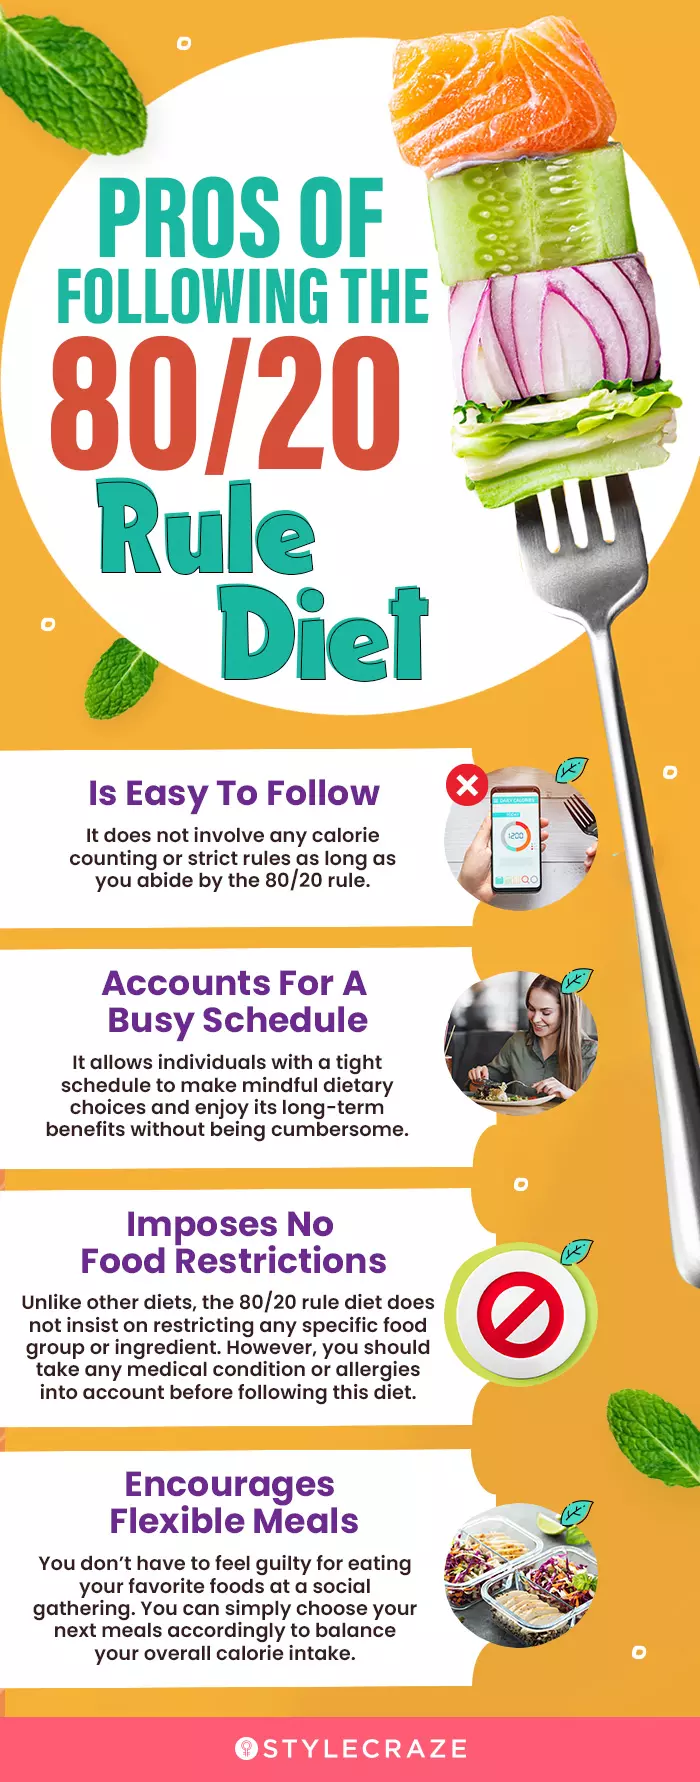 pros of following the 80/20 rule diet (infographic)